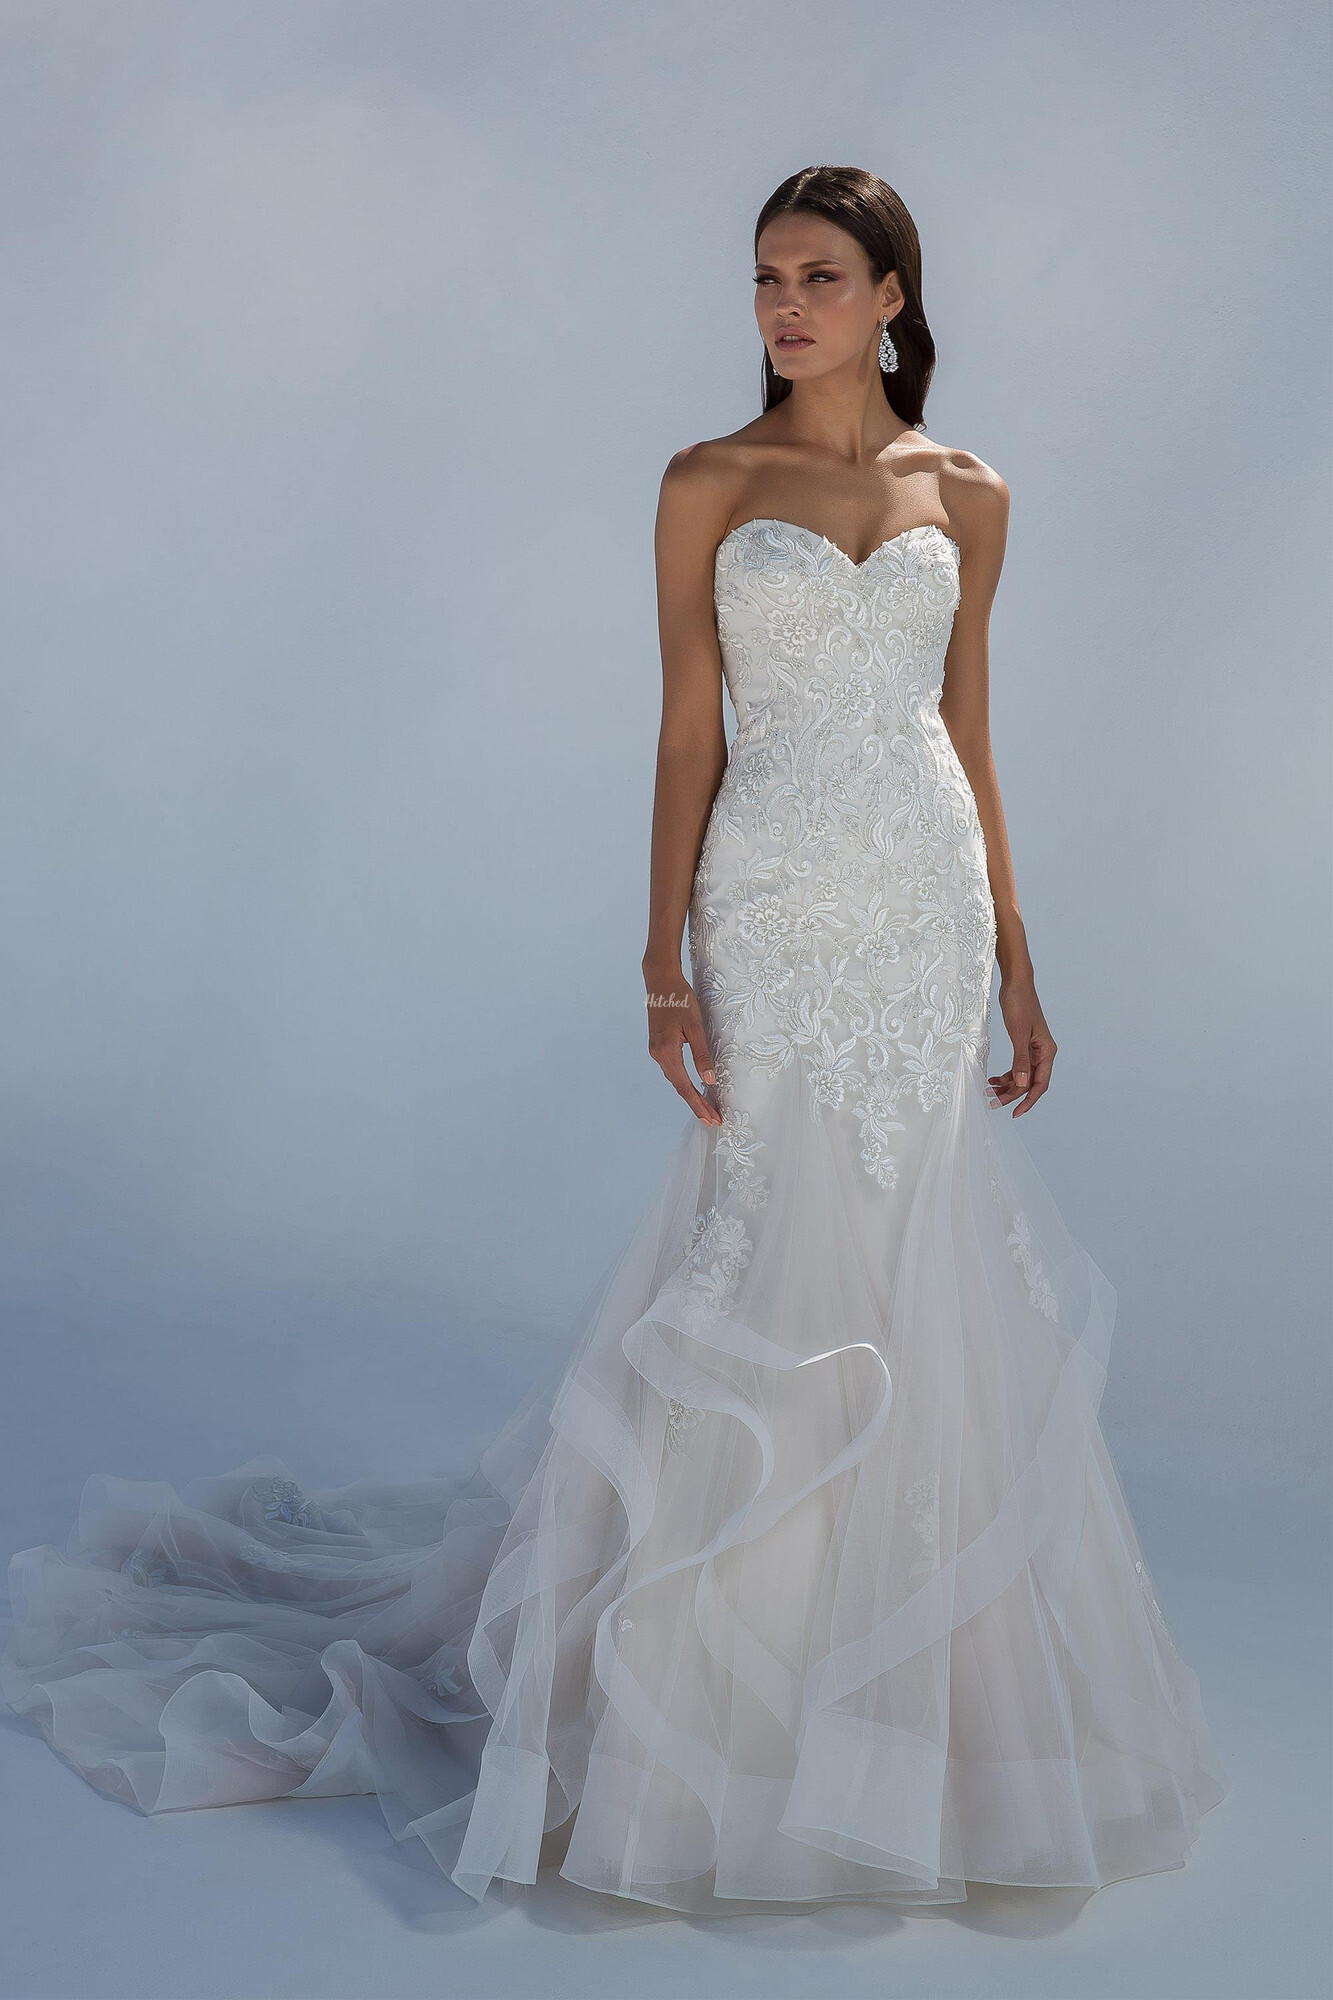 Amazing How Much Does A Justin Alexander Wedding Dress Cost of all time Check it out now 